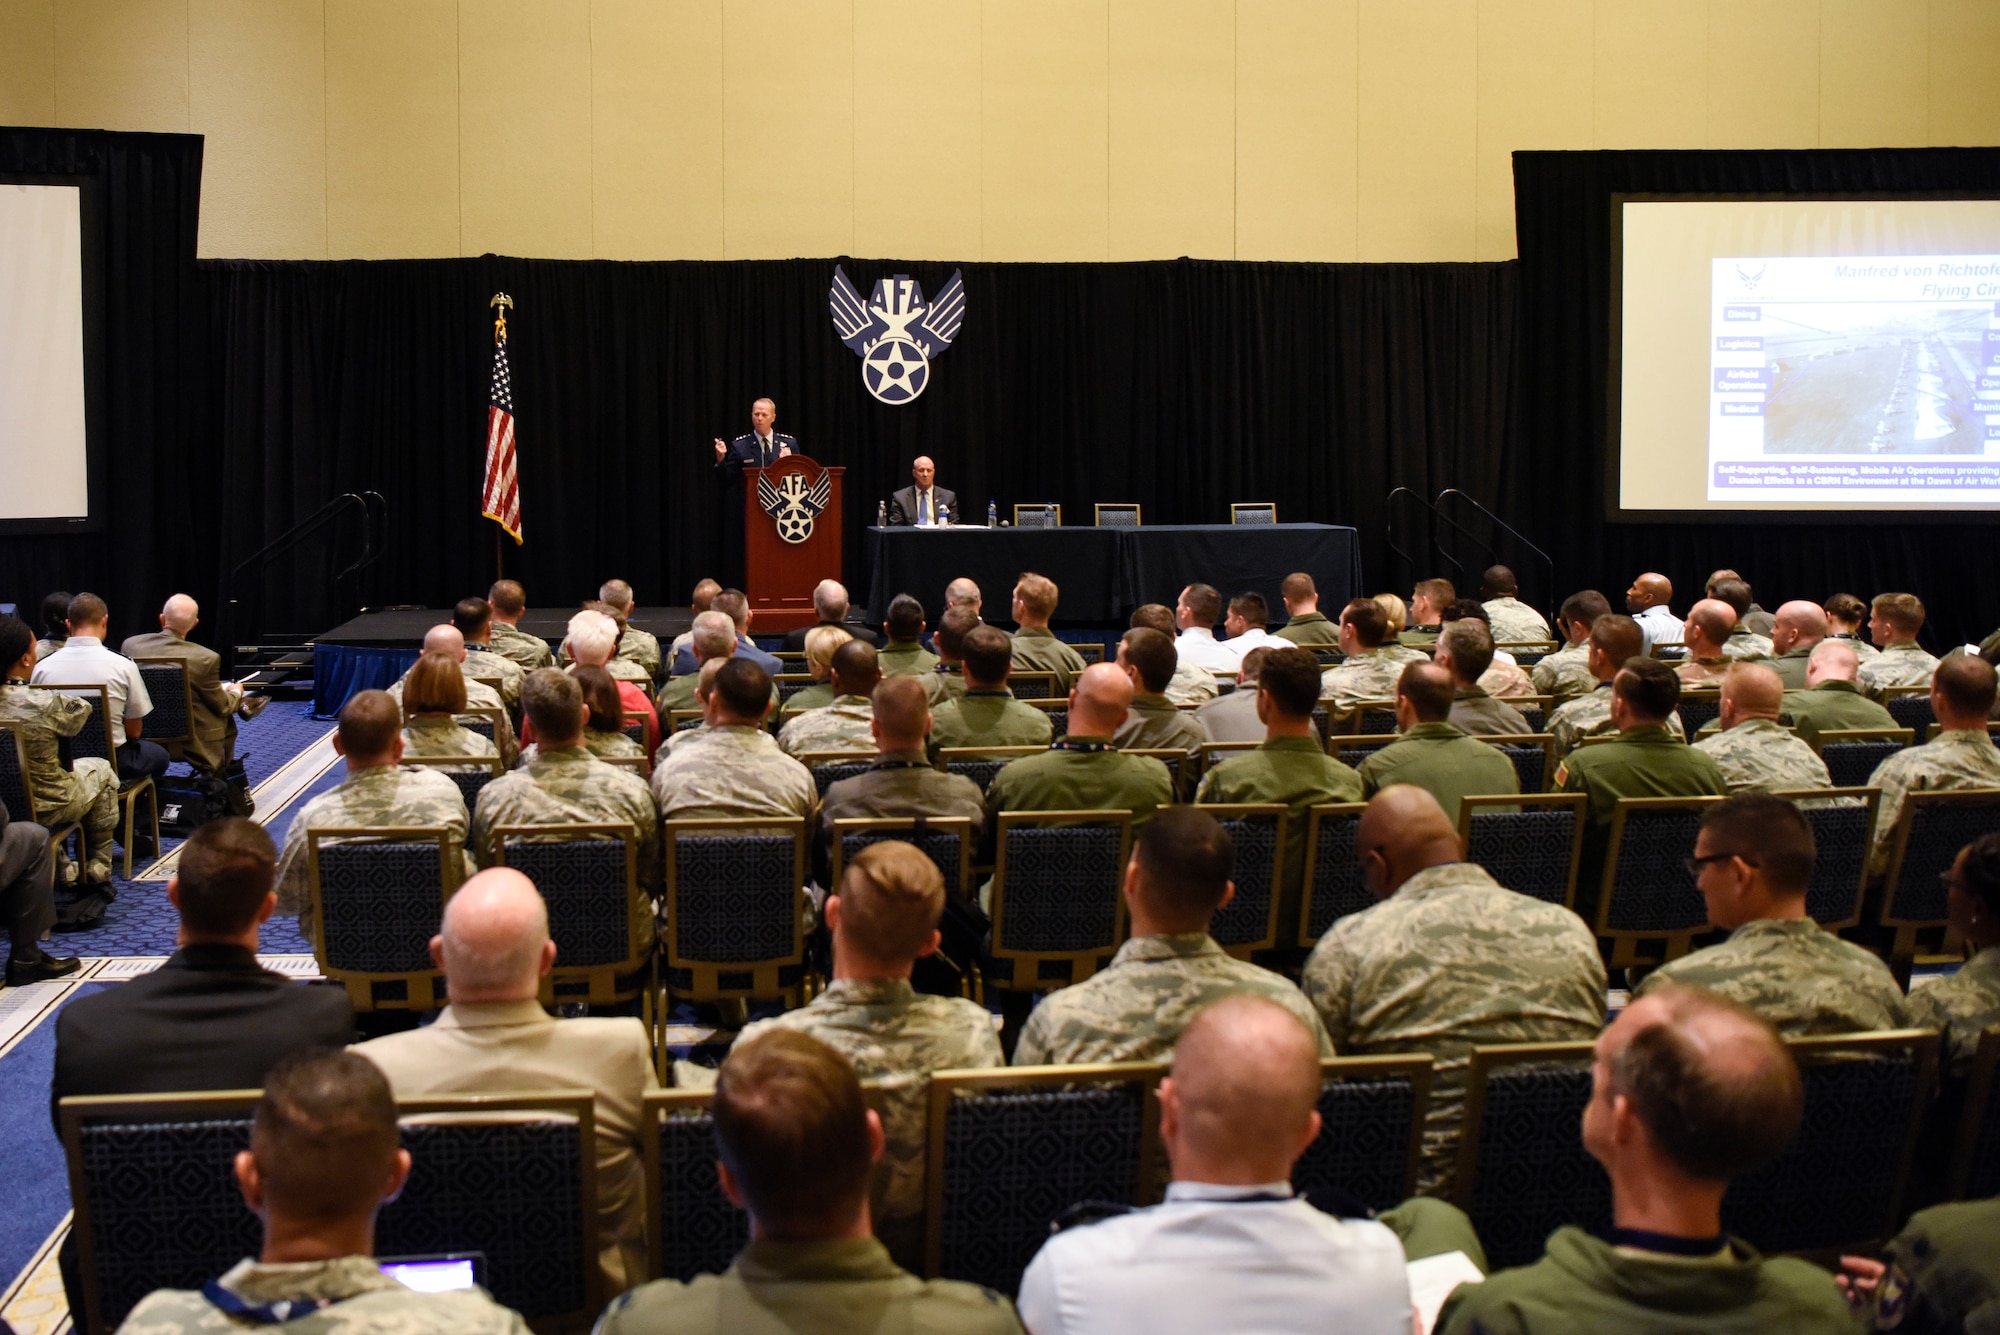 Airmen attend a speech on “The Force We Present” by Lt. Gen. Mark D. Kelly, Air Force deputy chief of staff or operations, during the Air Force Association’s Air, Space and Cyber Conference Sept. 17, 2018, in National Harbor, Md. The Air, Space and Cyber Conference is a professional development conference that offers an opportunity for Department of Defense personnel to participate in forums, speeches, seminars and workshops. (U.S. Air Force photo by Airman 1st Class Zoe M. Wockenfuss)